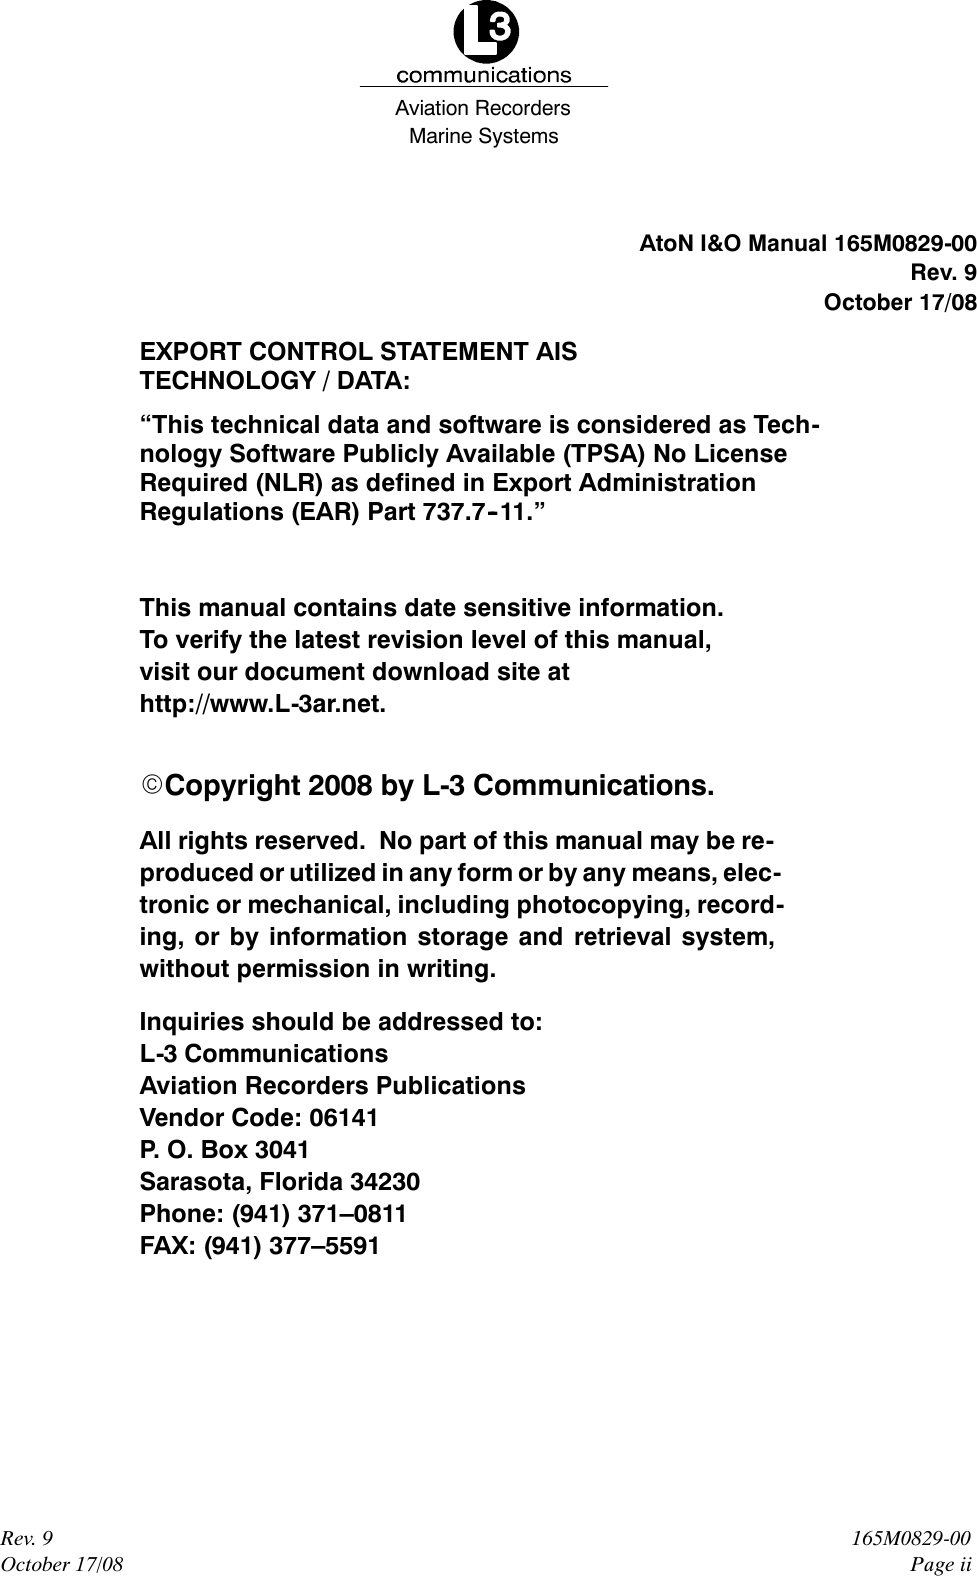 Marine SystemsAviation RecordersRev. 9October 17/08165M0829-00Page iiAtoN I&amp;O Manual 165M0829-00Rev. 9October 17/08EXPORT CONTROL STATEMENT AISTECHNOLOGY / DATA:“This technical data and software is considered as Tech-nology Software Publicly Available (TPSA) No LicenseRequired (NLR) as defined in Export AdministrationRegulations (EAR) Part 737.7--11.”This manual contains date sensitive information.To verify the latest revision level of this manual,visit our document download site athttp://www.L-3ar.net.ECopyright 2008 by L-3 Communications.All rights reserved. No part of this manual may be re-produced or utilized in any form or by any means, elec-tronic or mechanical, including photocopying, record-ing, or by information storage and retrieval system,without permission in writing.Inquiries should be addressed to:L-3 CommunicationsAviation Recorders PublicationsVendor Code: 06141P. O. Box 3041Sarasota, Florida 34230Phone: (941) 371–0811FAX: (941) 377–5591